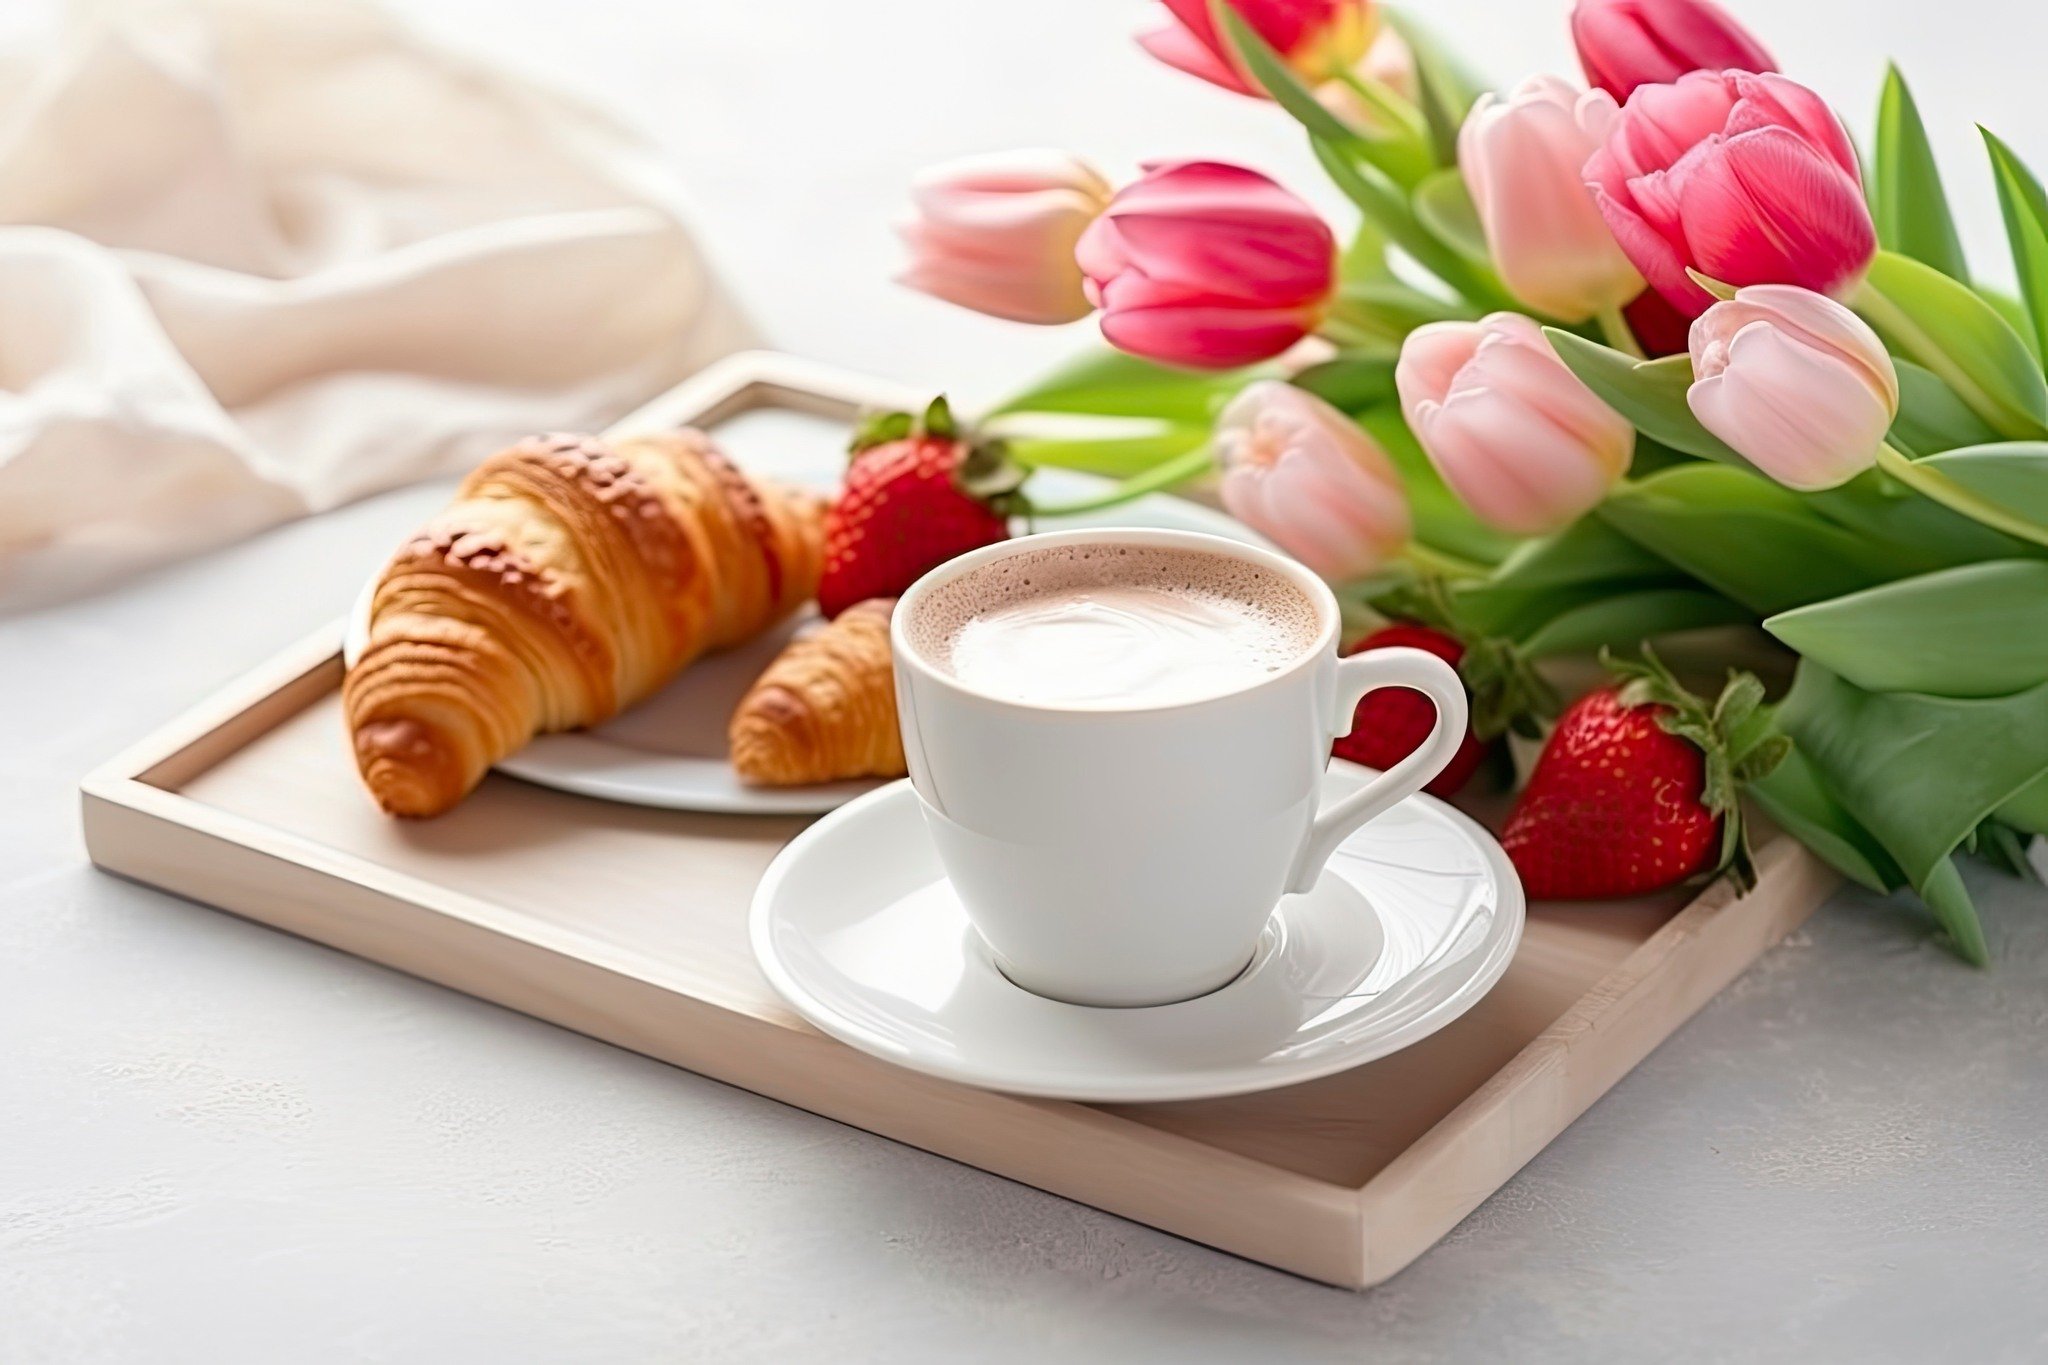 Transform Mother&rsquo;s Day with the gift of choice - A Rosen House Inn Gift Card. 🌹 Tailor it to her liking with exclusive add-ons available on our website, like 'in-room breakfast' or a romantic 'wine and cheese' evening. 🍇#GiftWithATwist #Rosen